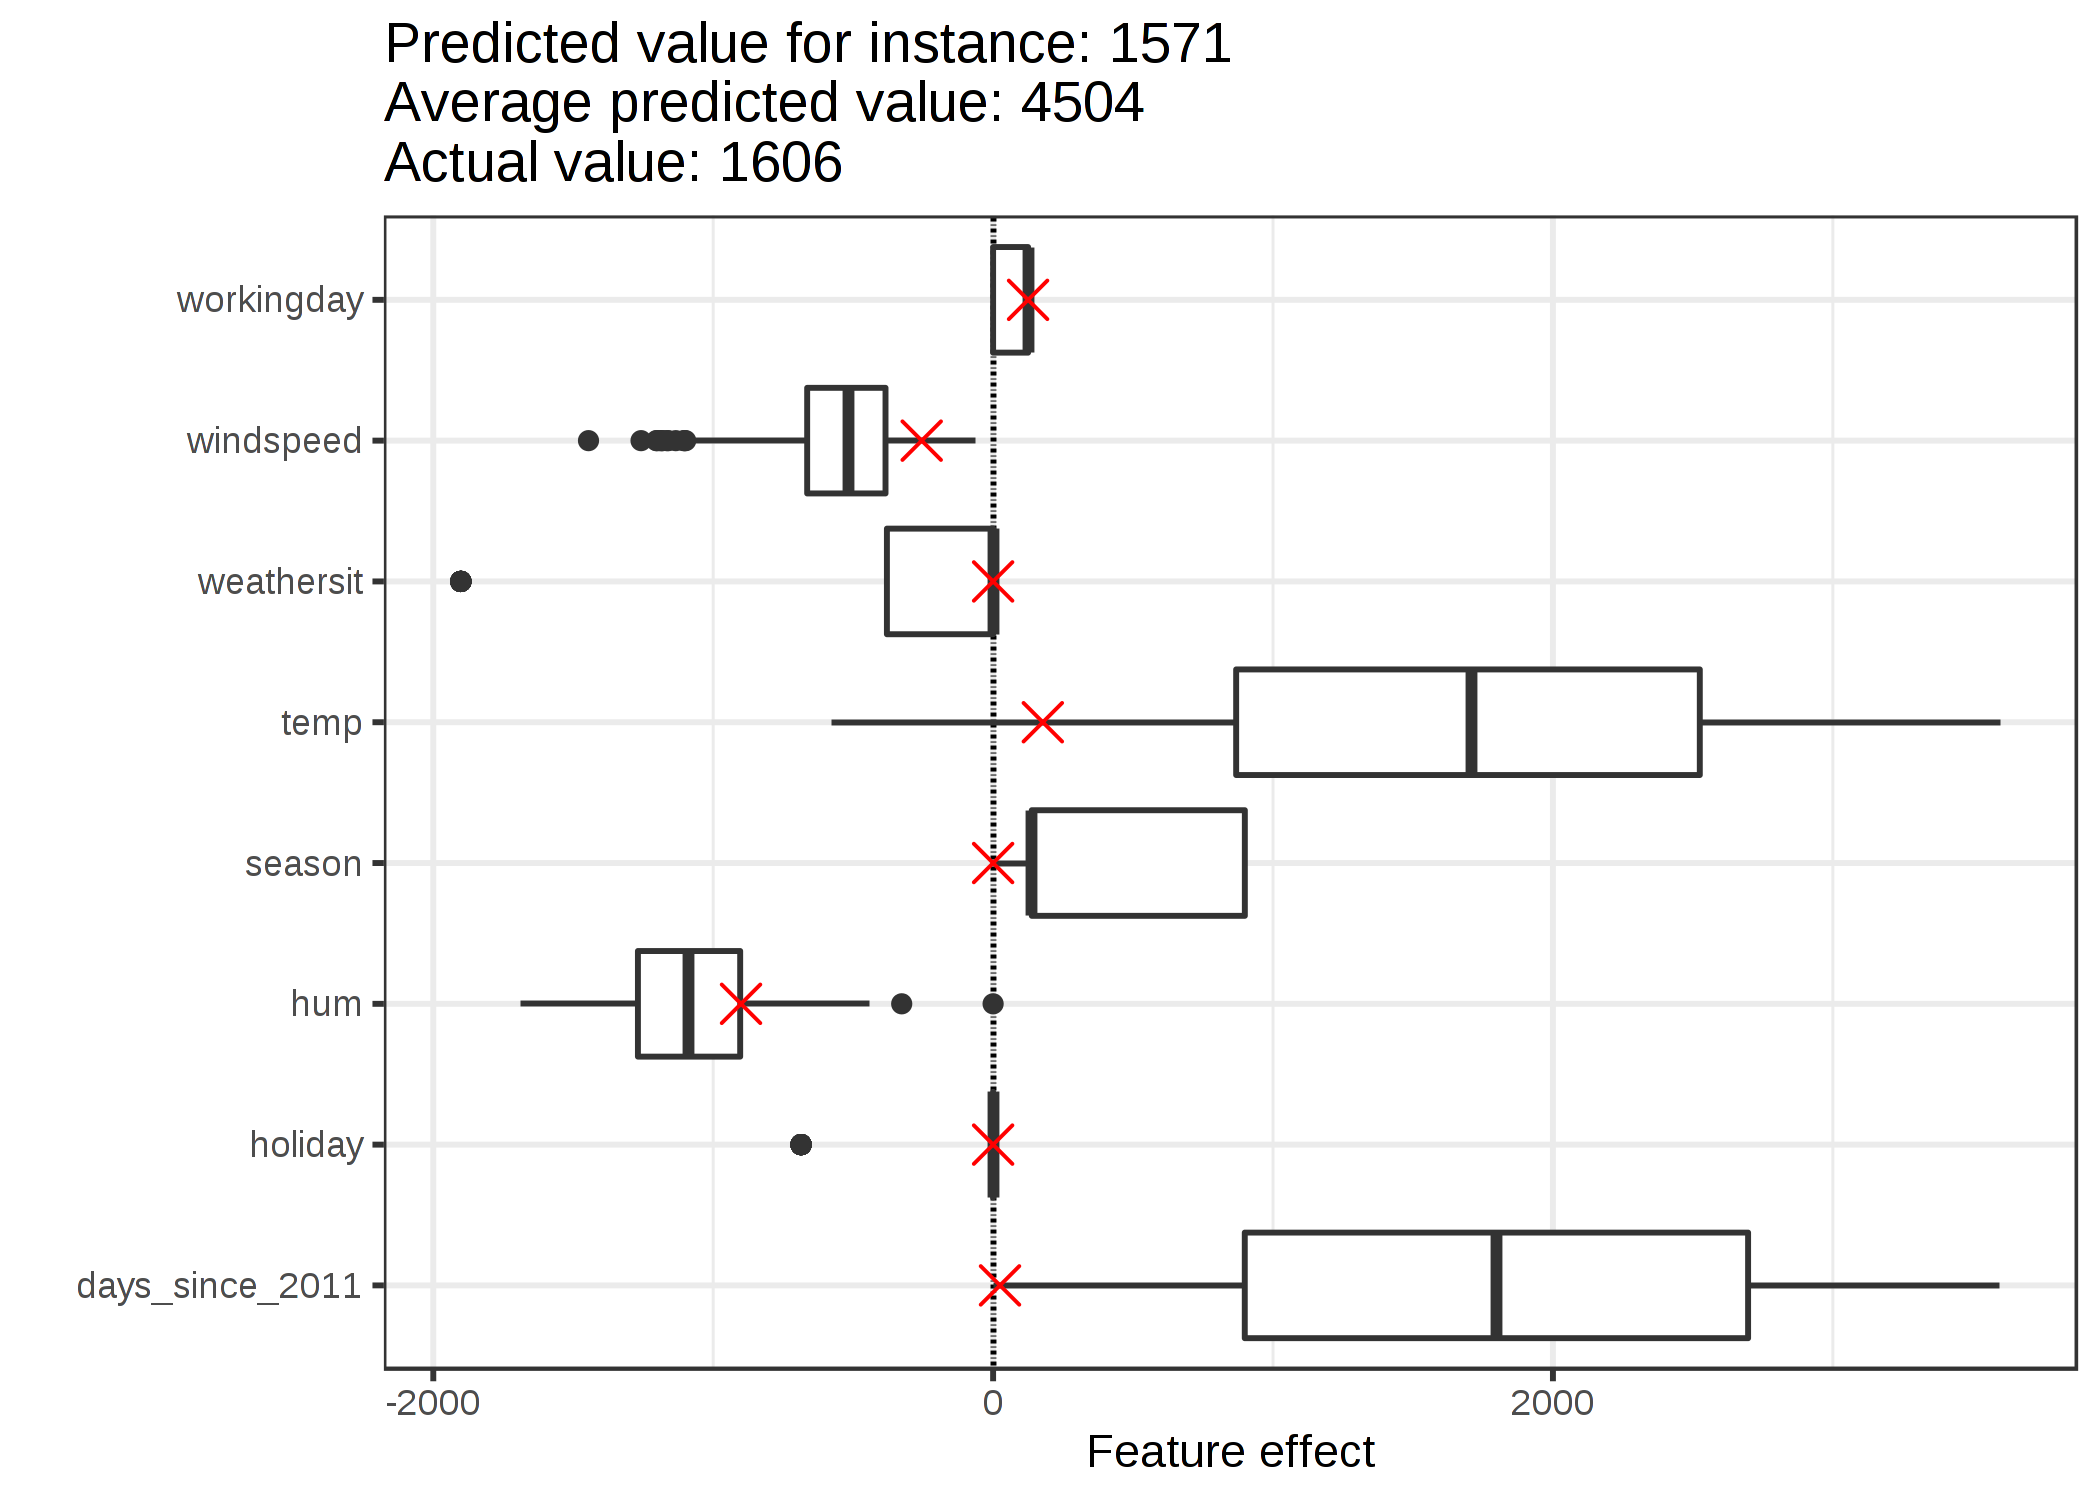 The effect plot for one instance shows the effect distribution and highlights the effects of the instance of interest.